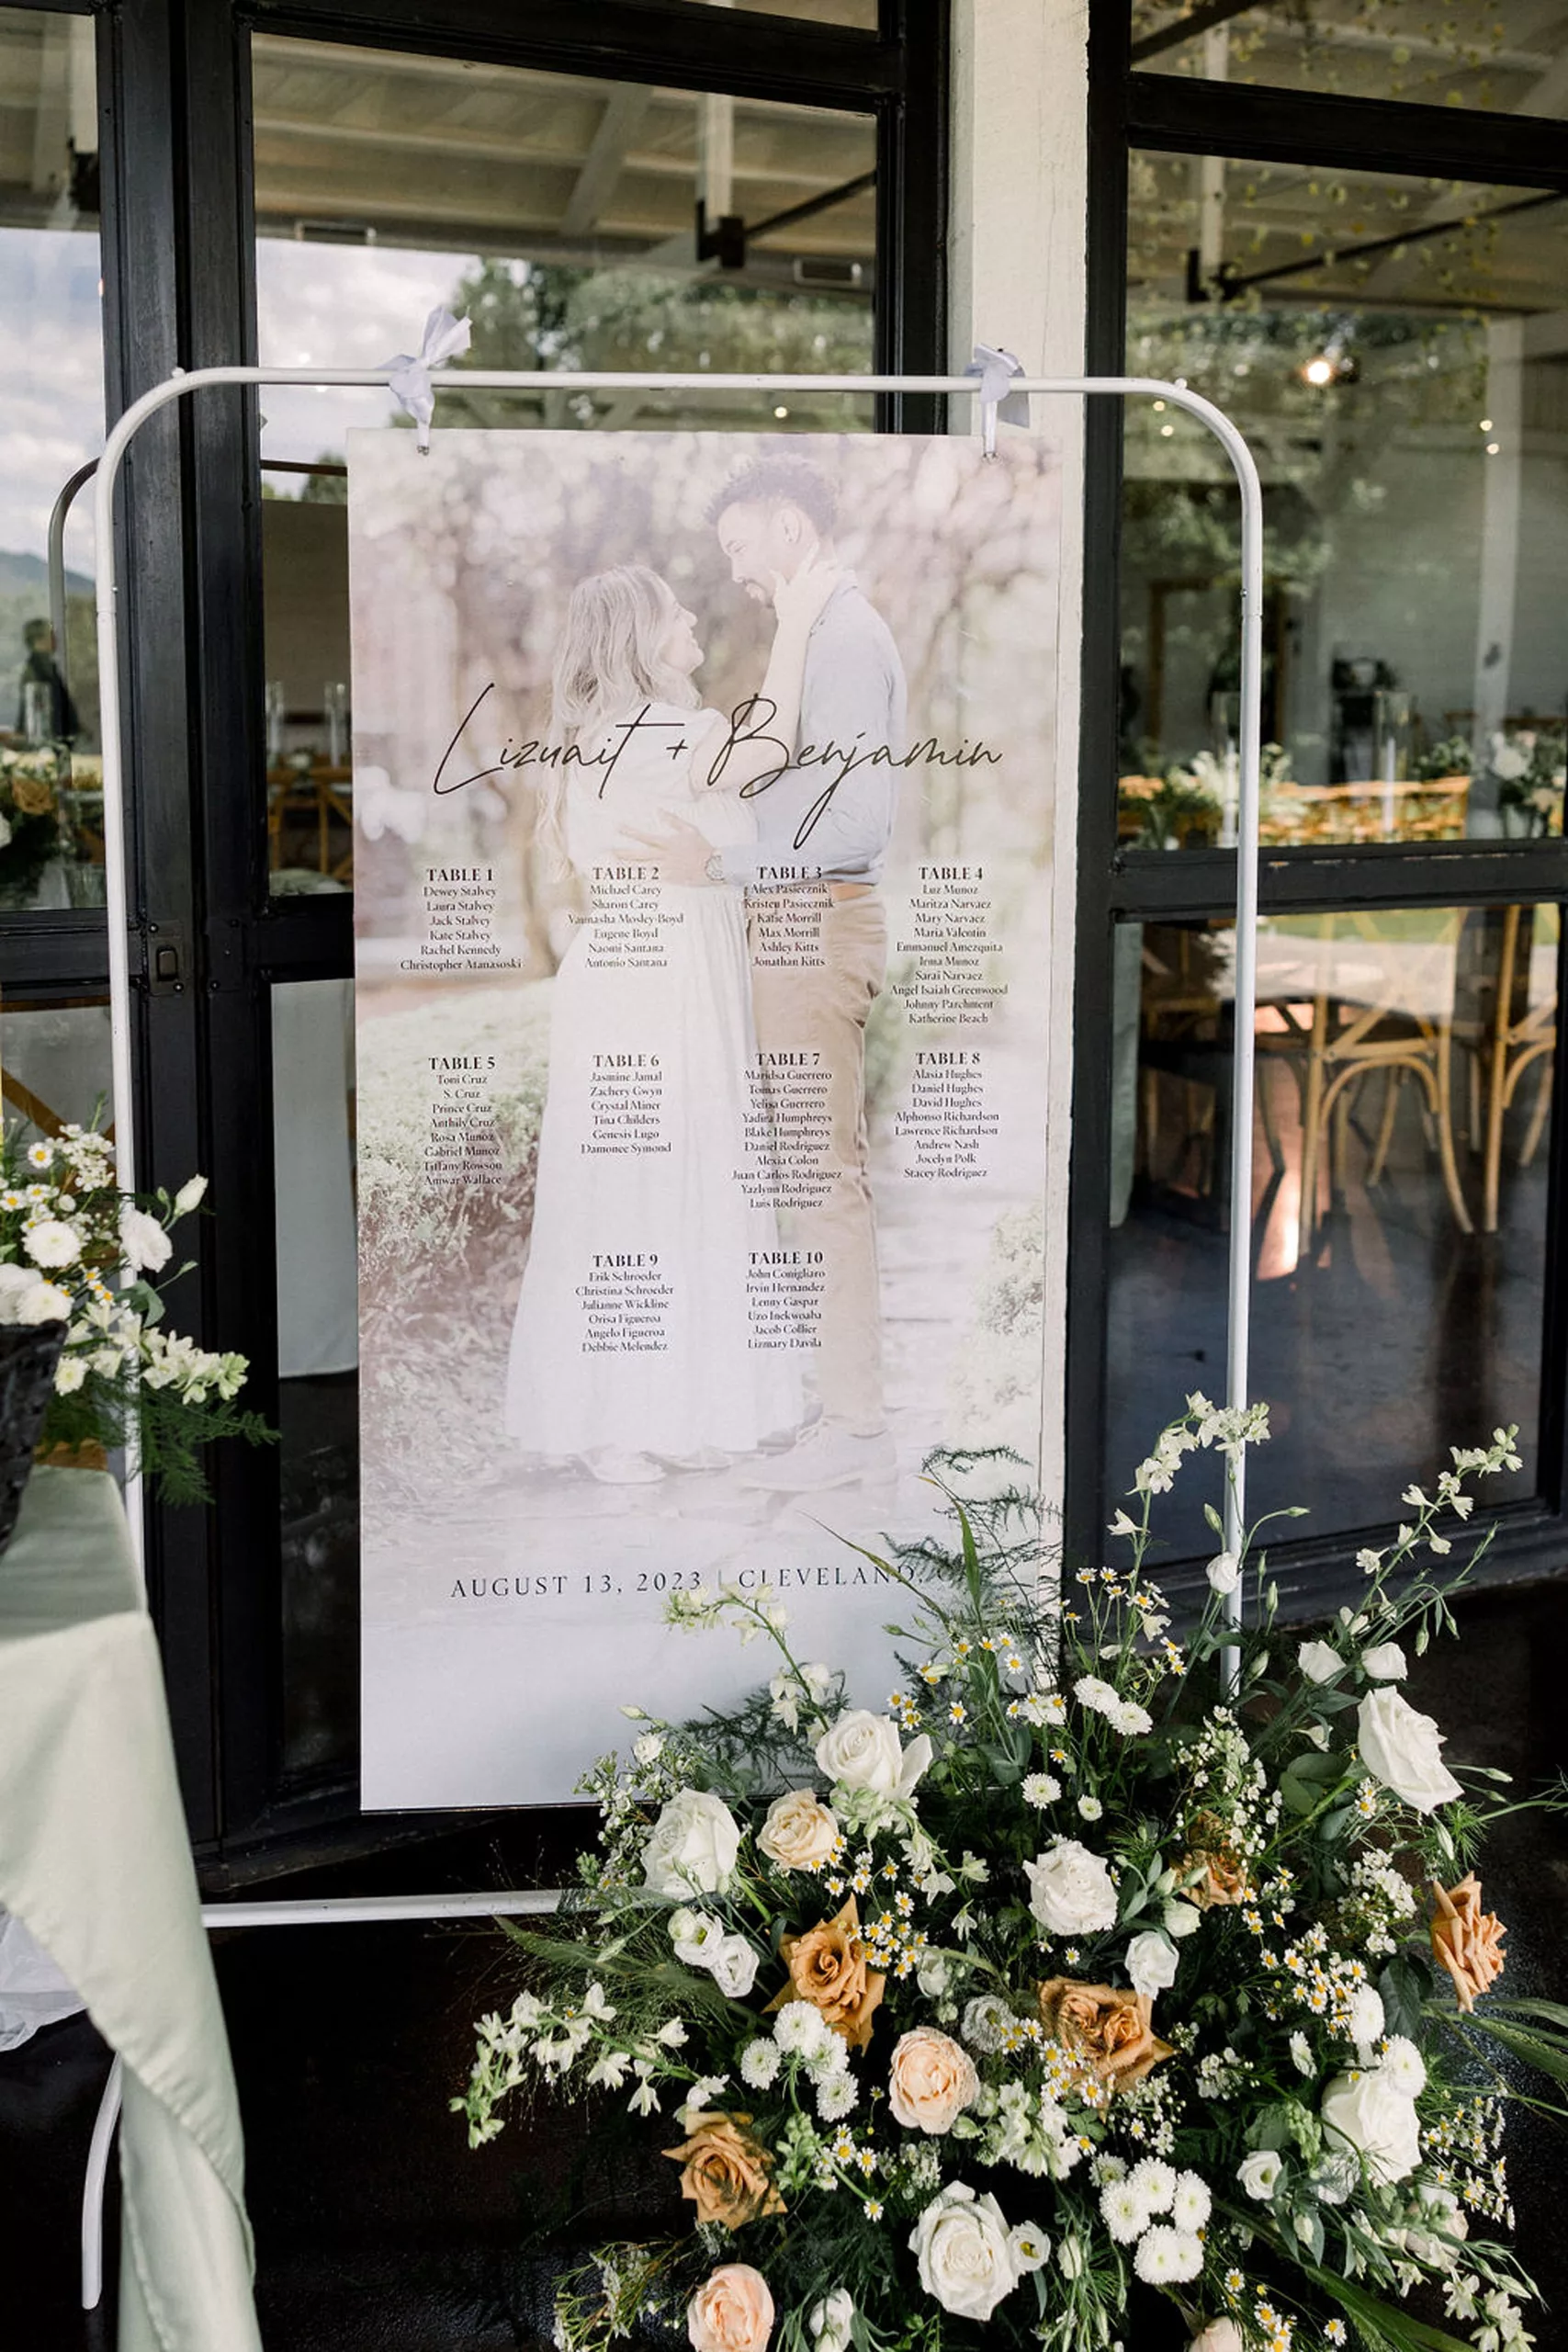 Details of a wedding reception table assignment hanging behind a large white and orange floral